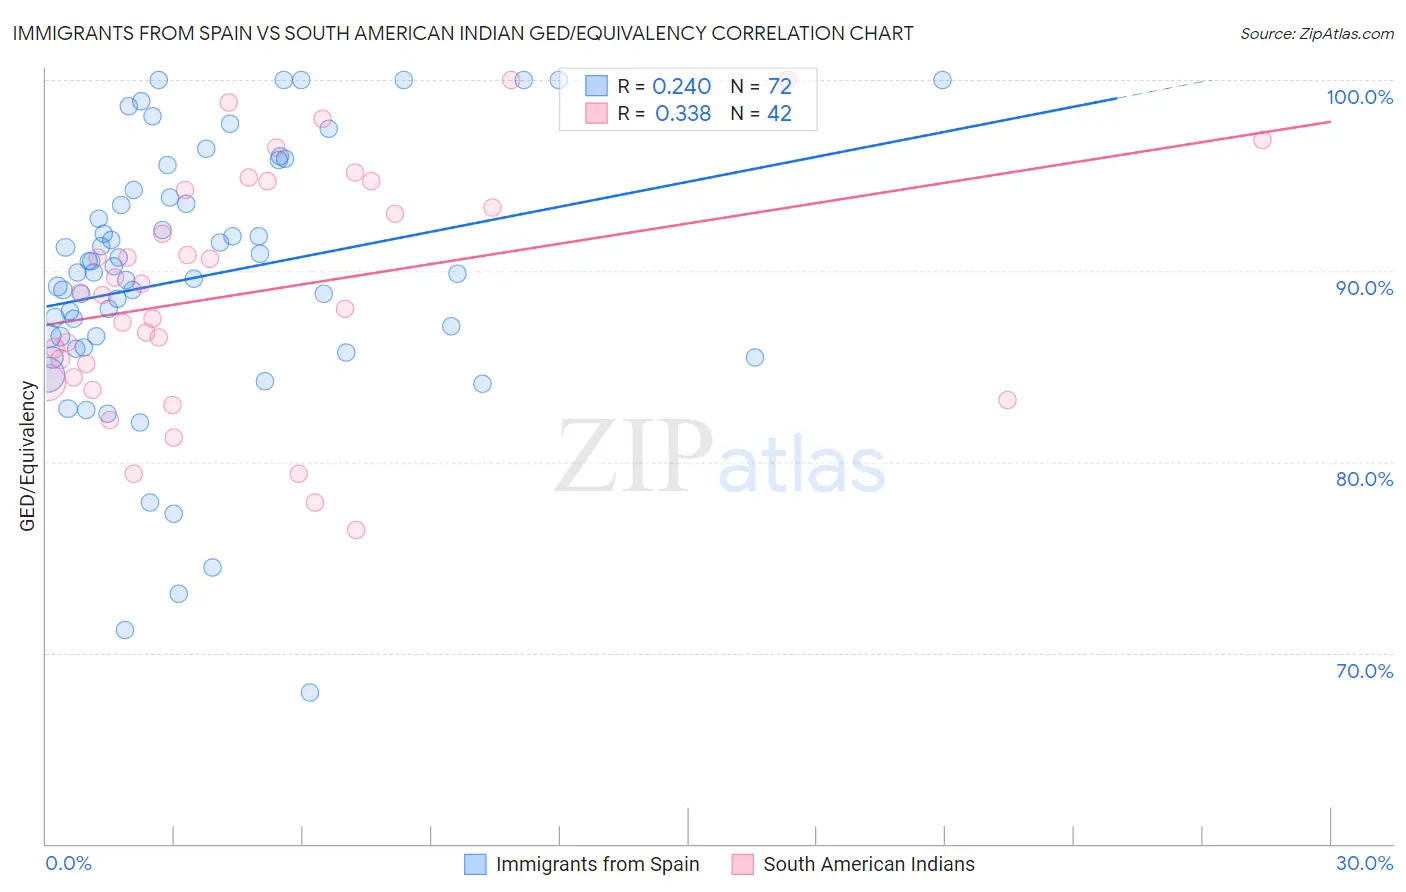 Immigrants from Spain vs South American Indian GED/Equivalency